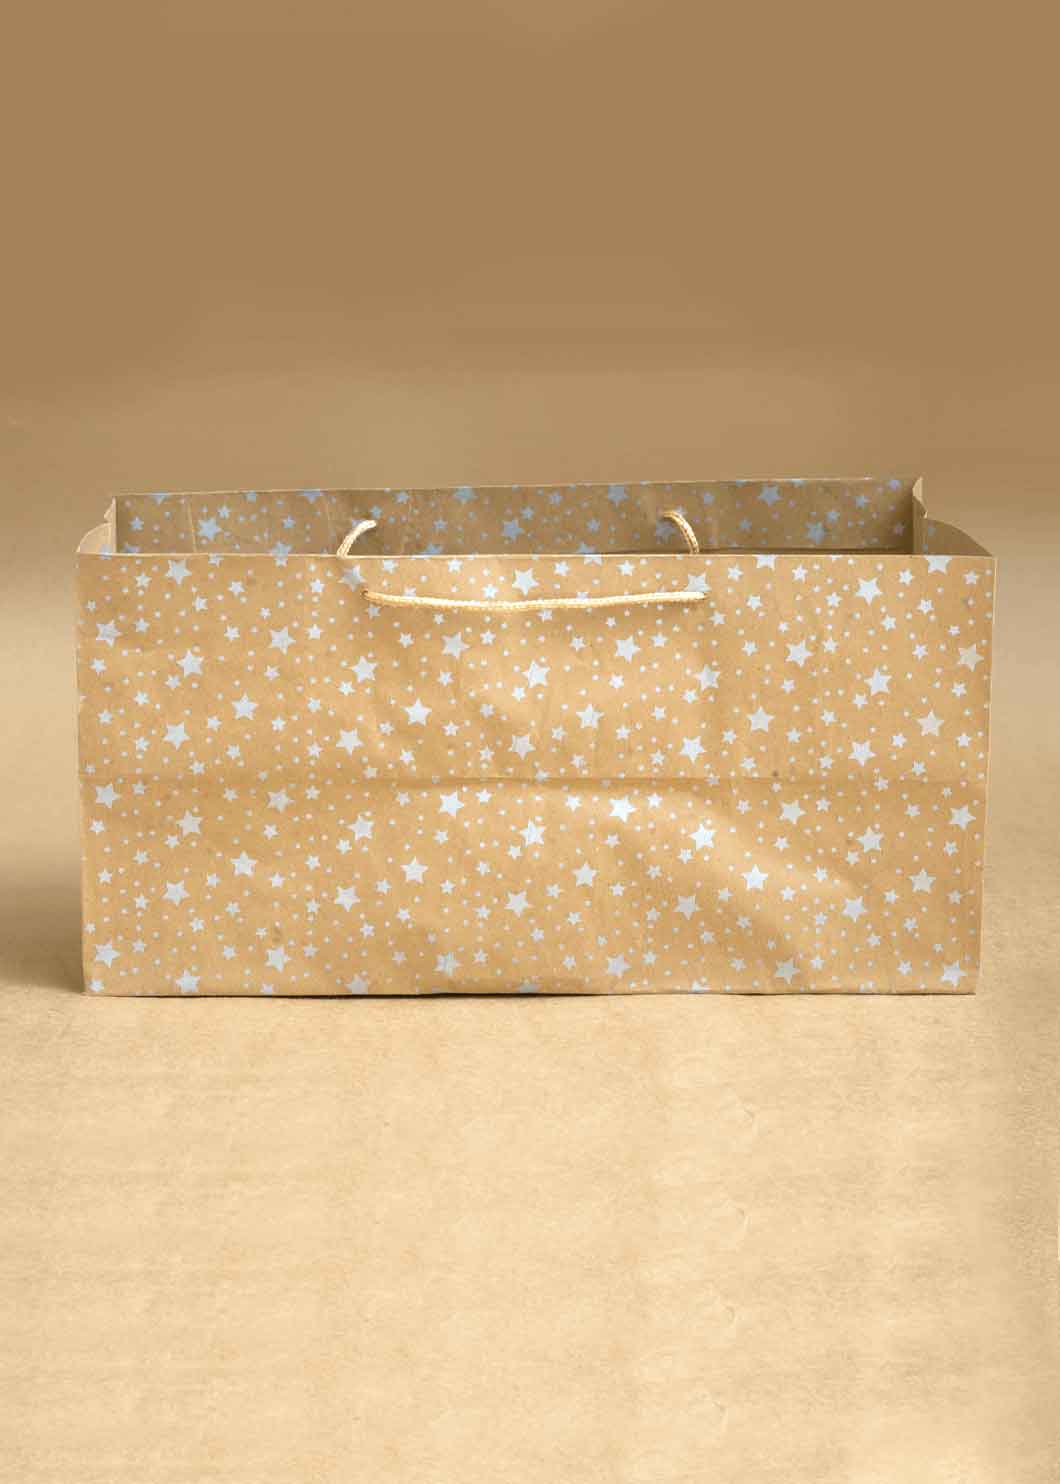 Craft Paper Bag Star Pattern - Craft Paper Bag - Yellow Silver Red - 14x7 Square Paper Bag